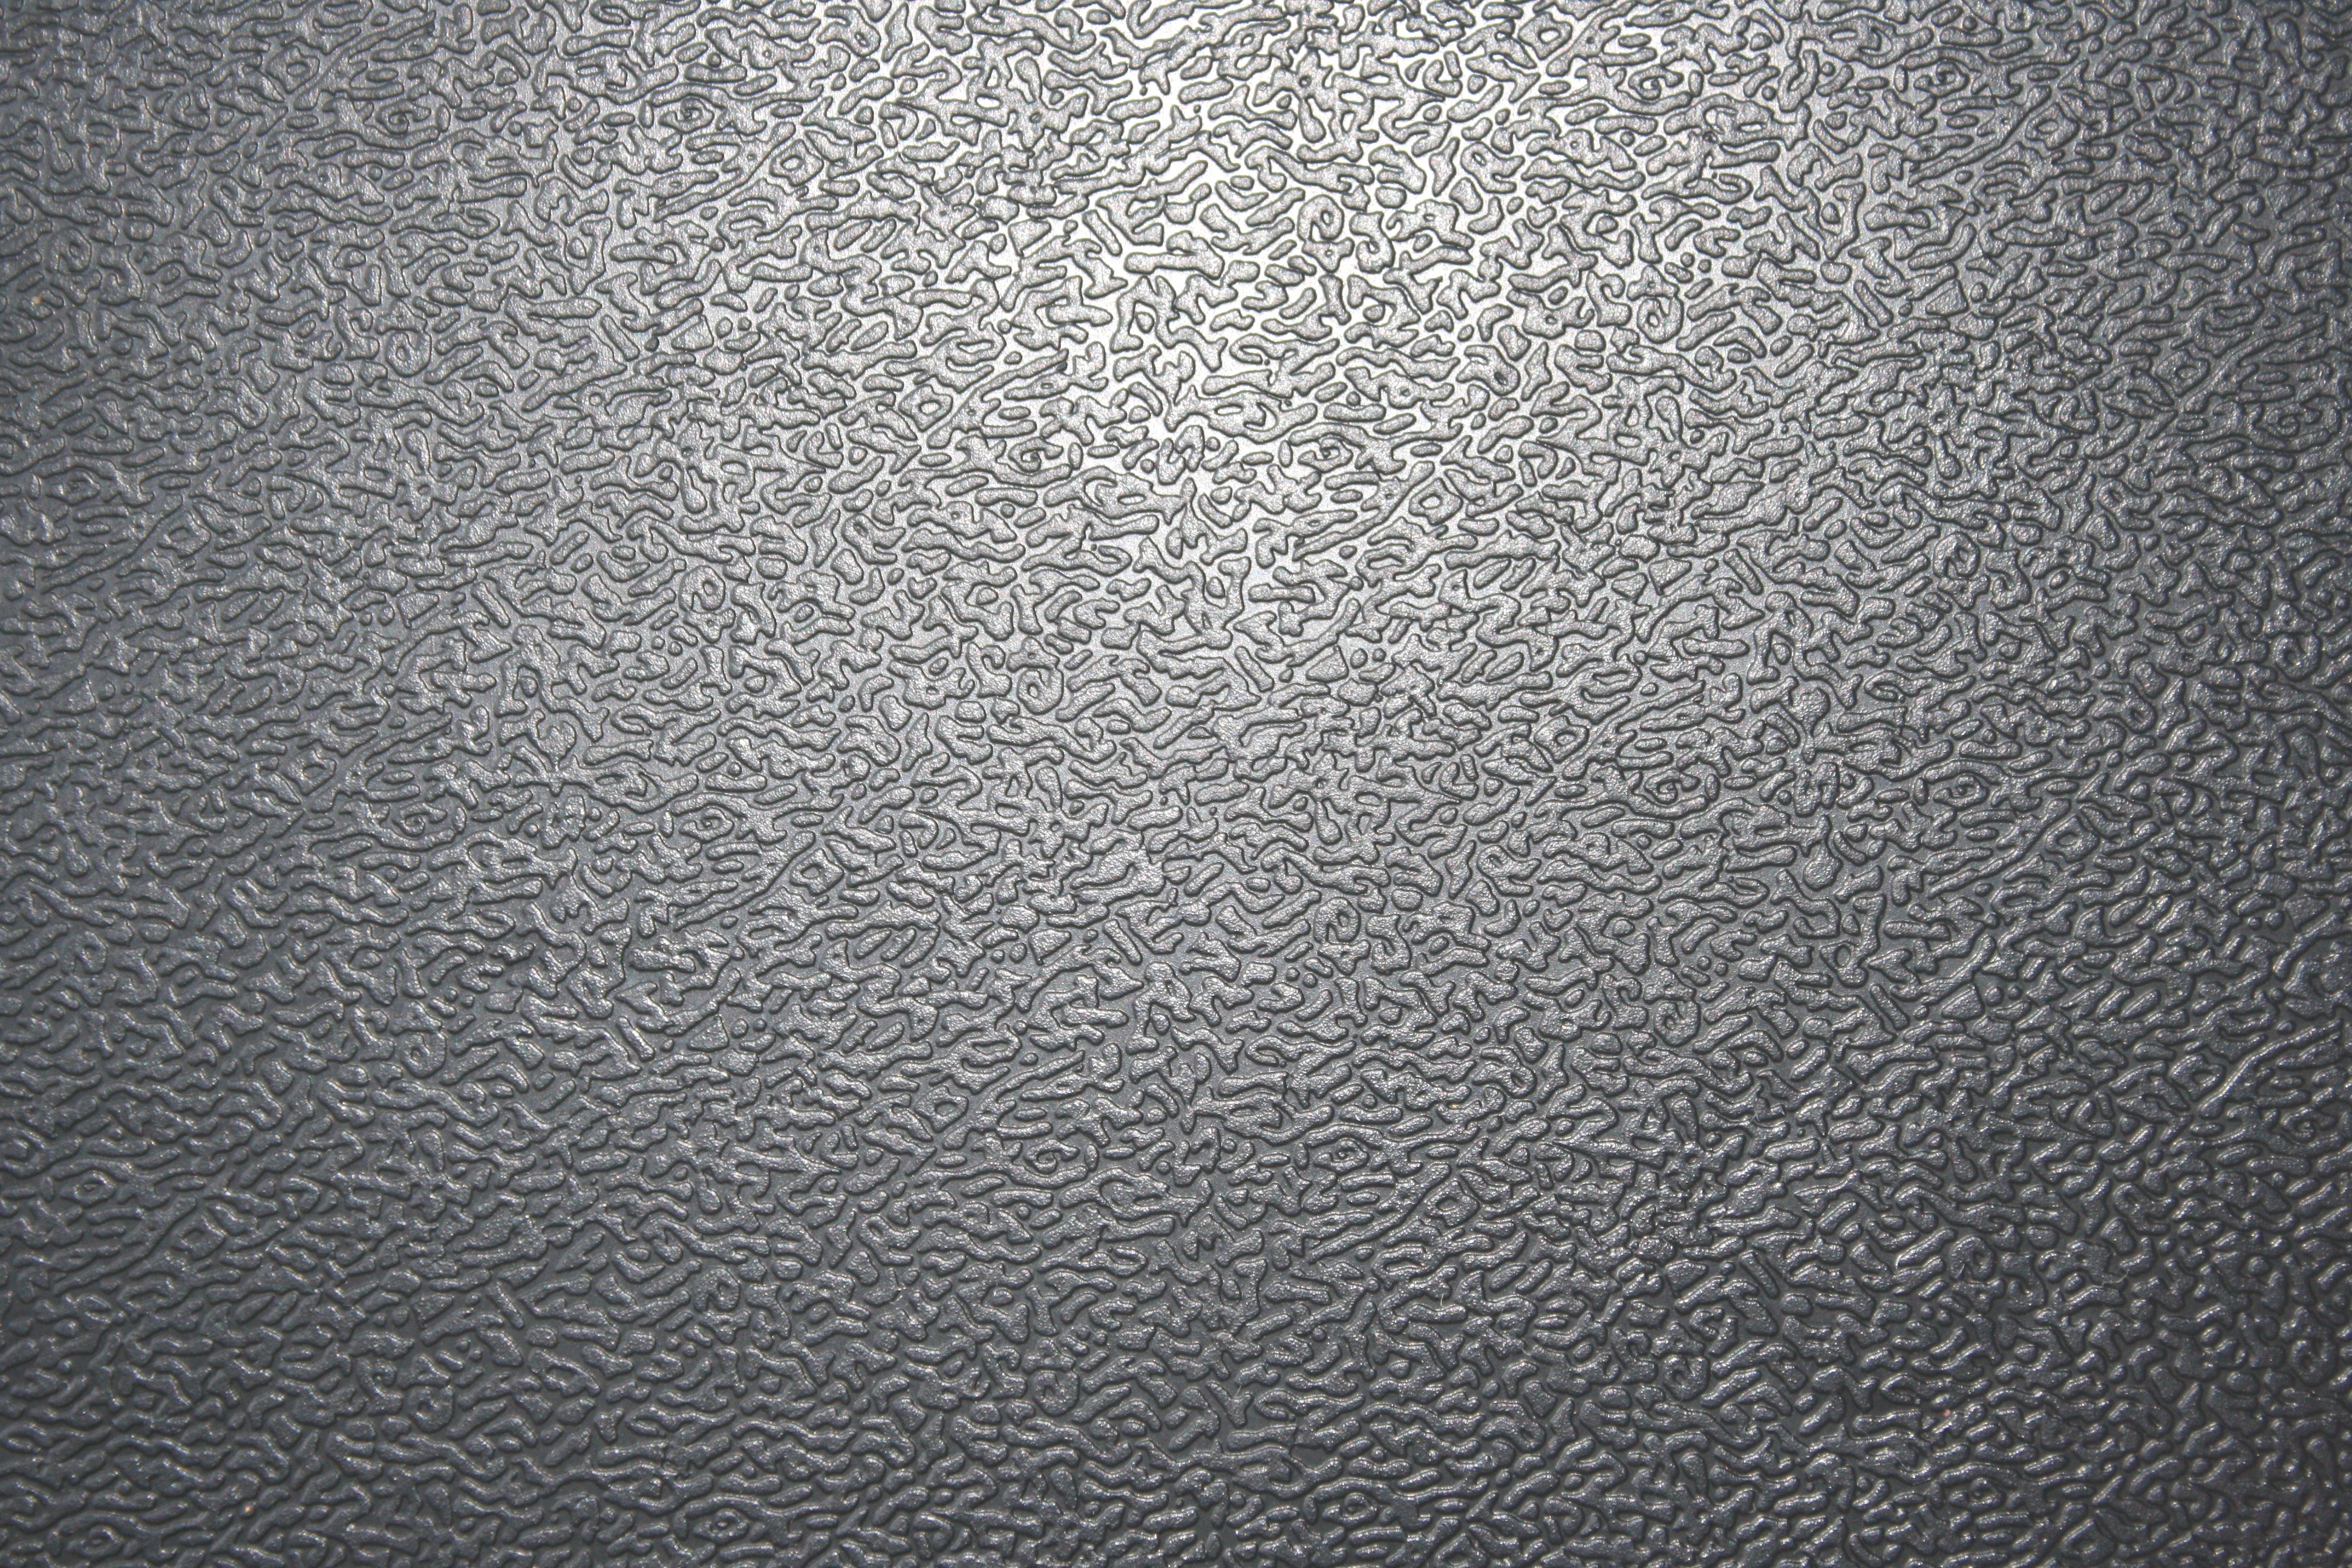 Textured Gray Plastic Close Up Picture Photograph Photos